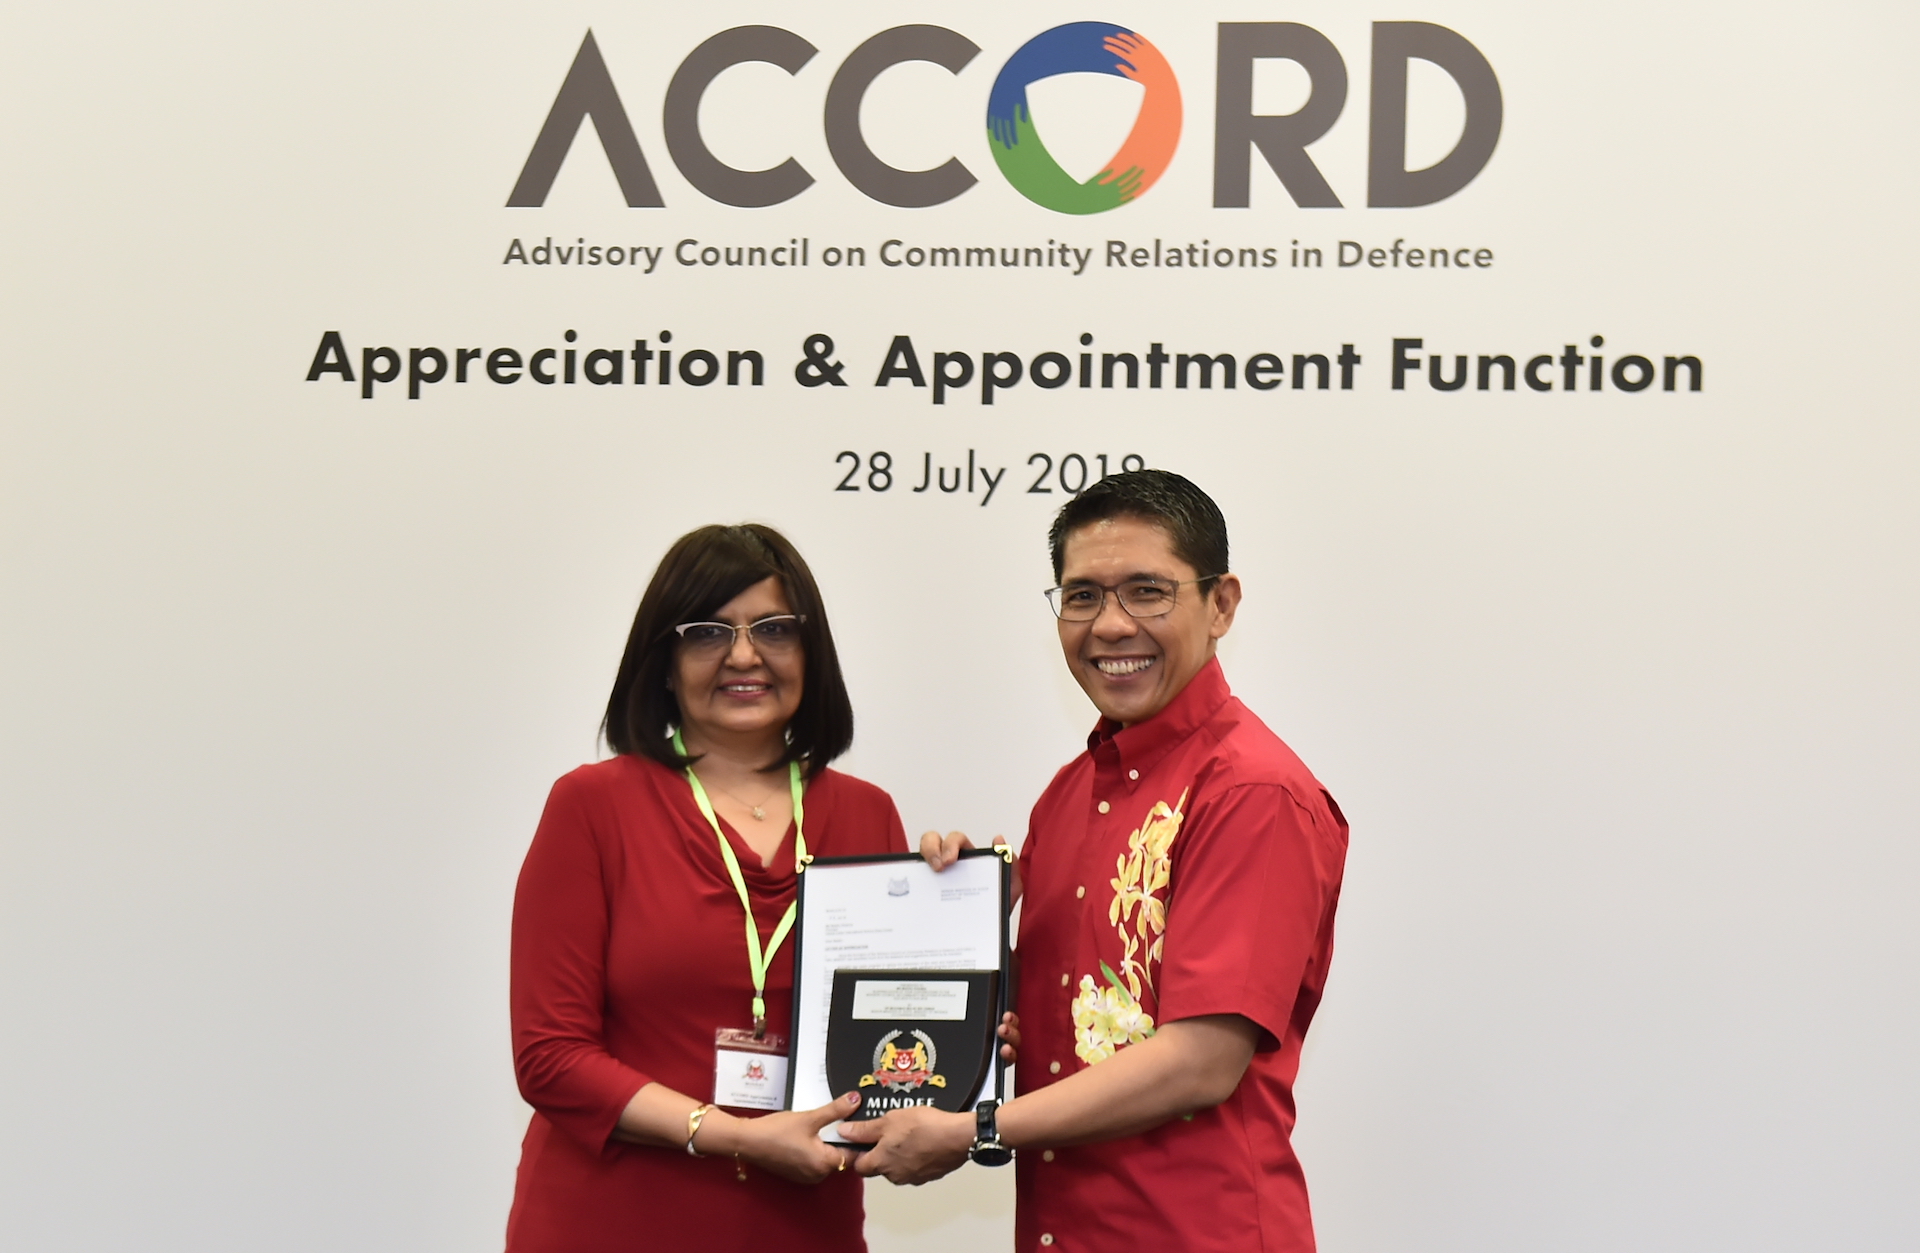 ACCORD strengthens NS support, builds on past success